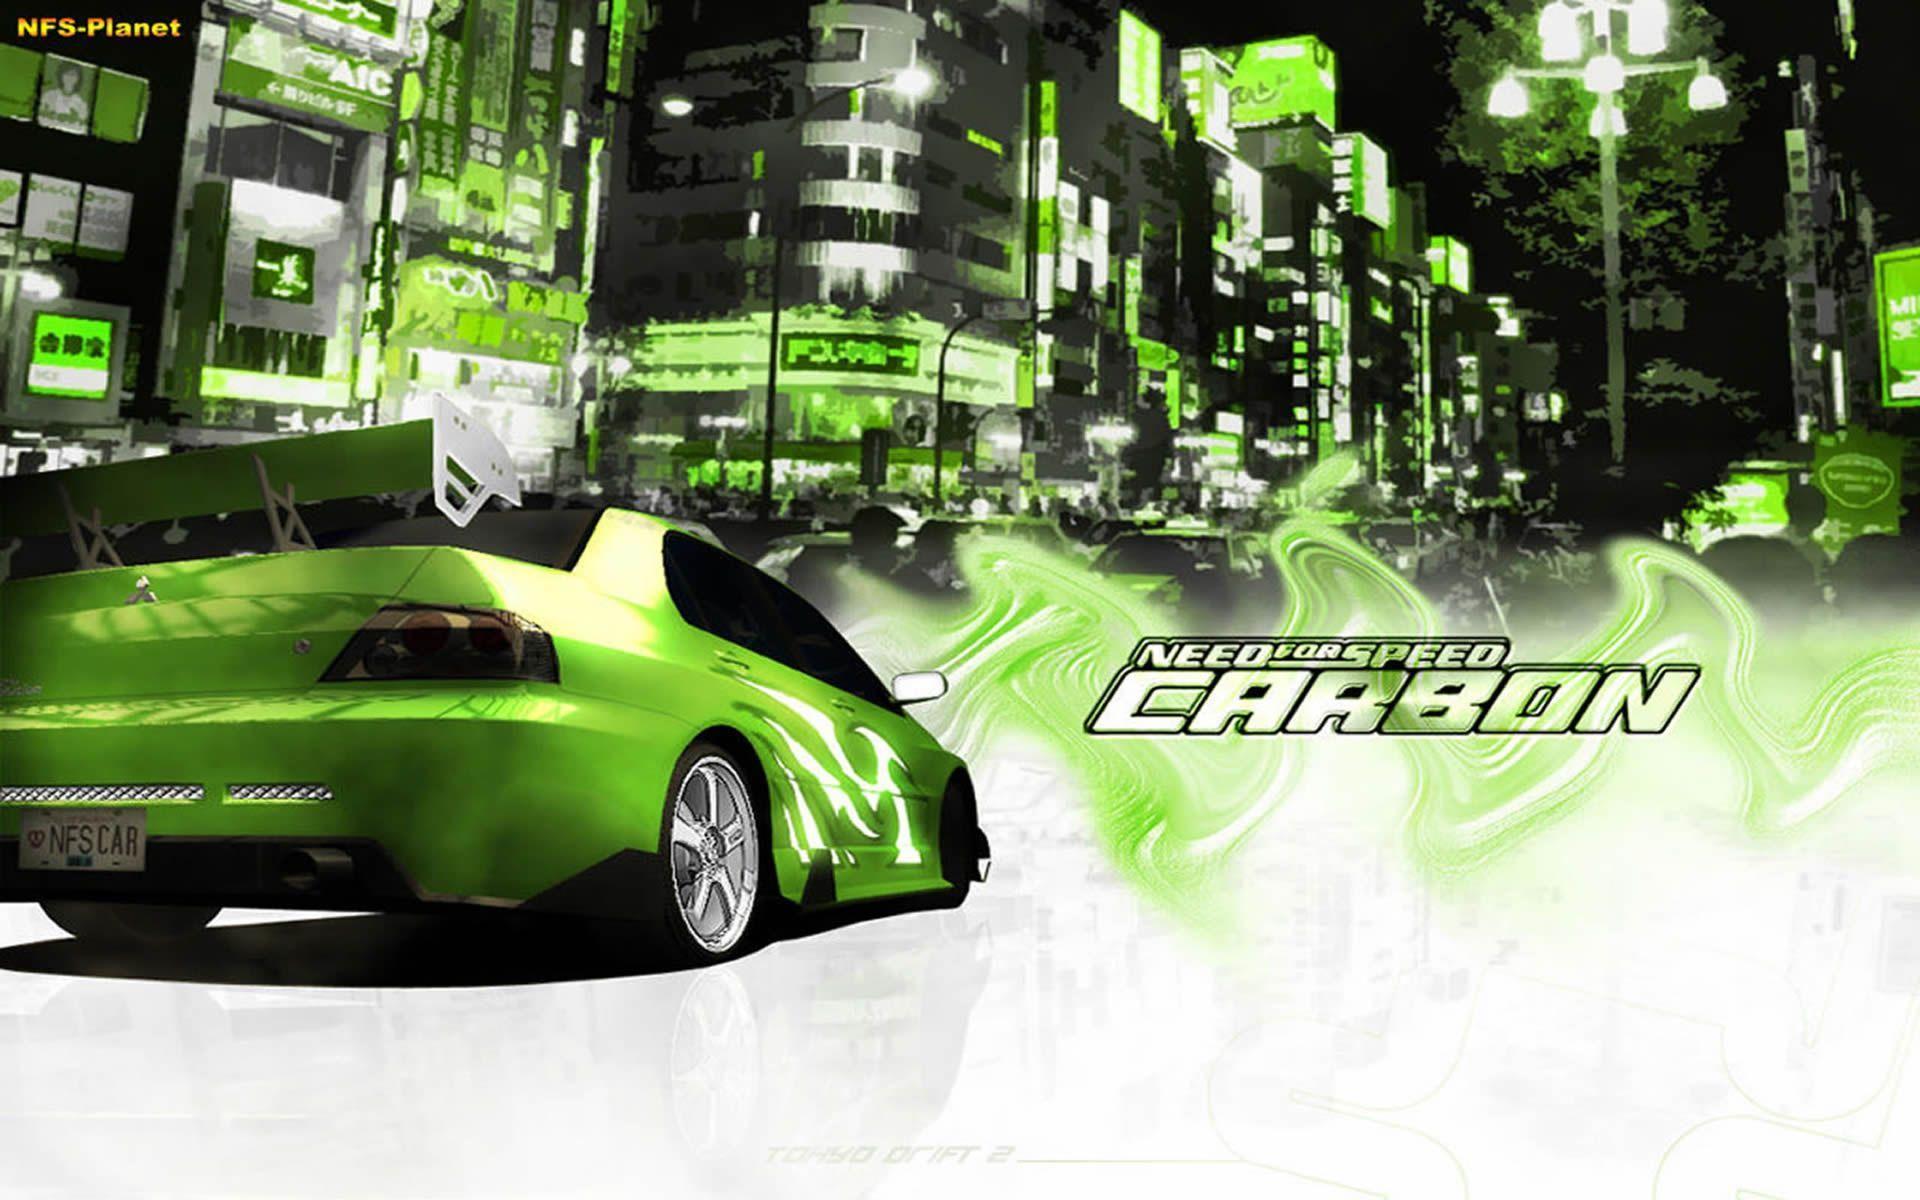 Nfs Carbon 4 Games Wallpaper Image featuring Need